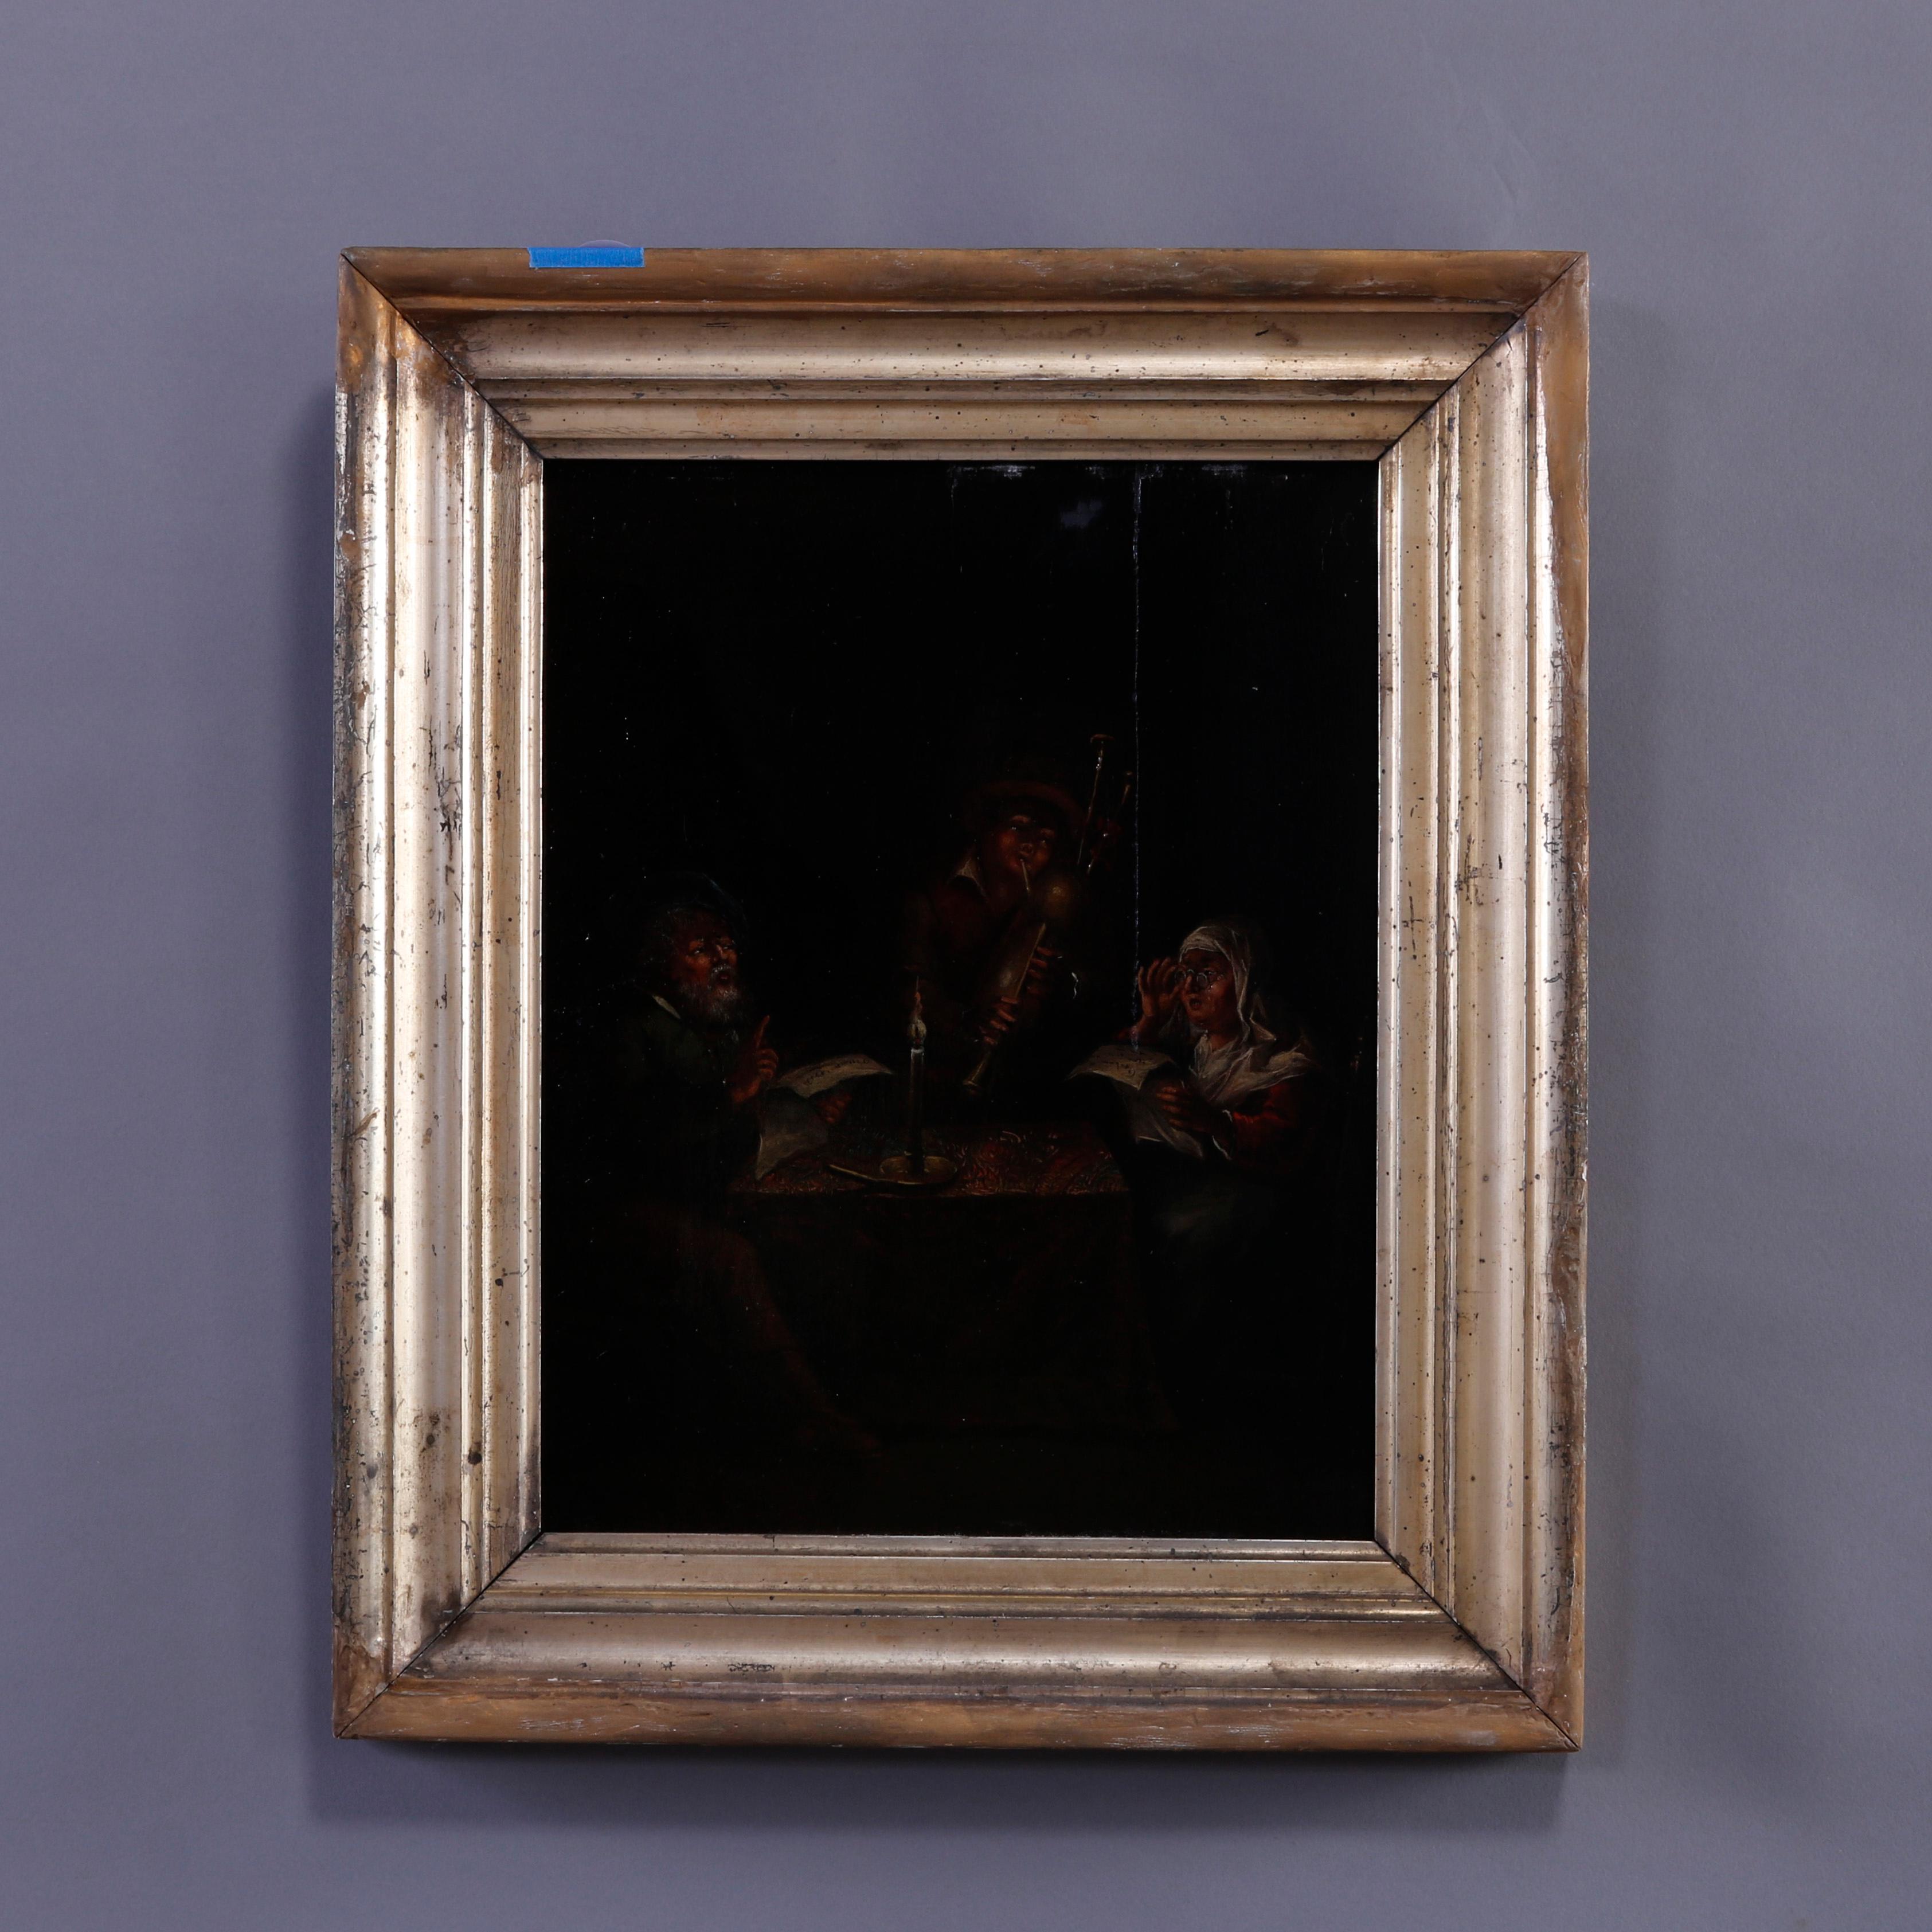 An antique painting offers oil on board interior genre tavern scene with couple and bagpipe player, unsigned, seated in giltwood frame, c1850

Measures - overall 18''H x 15''W x 2''D; sight 11'' x 14''.